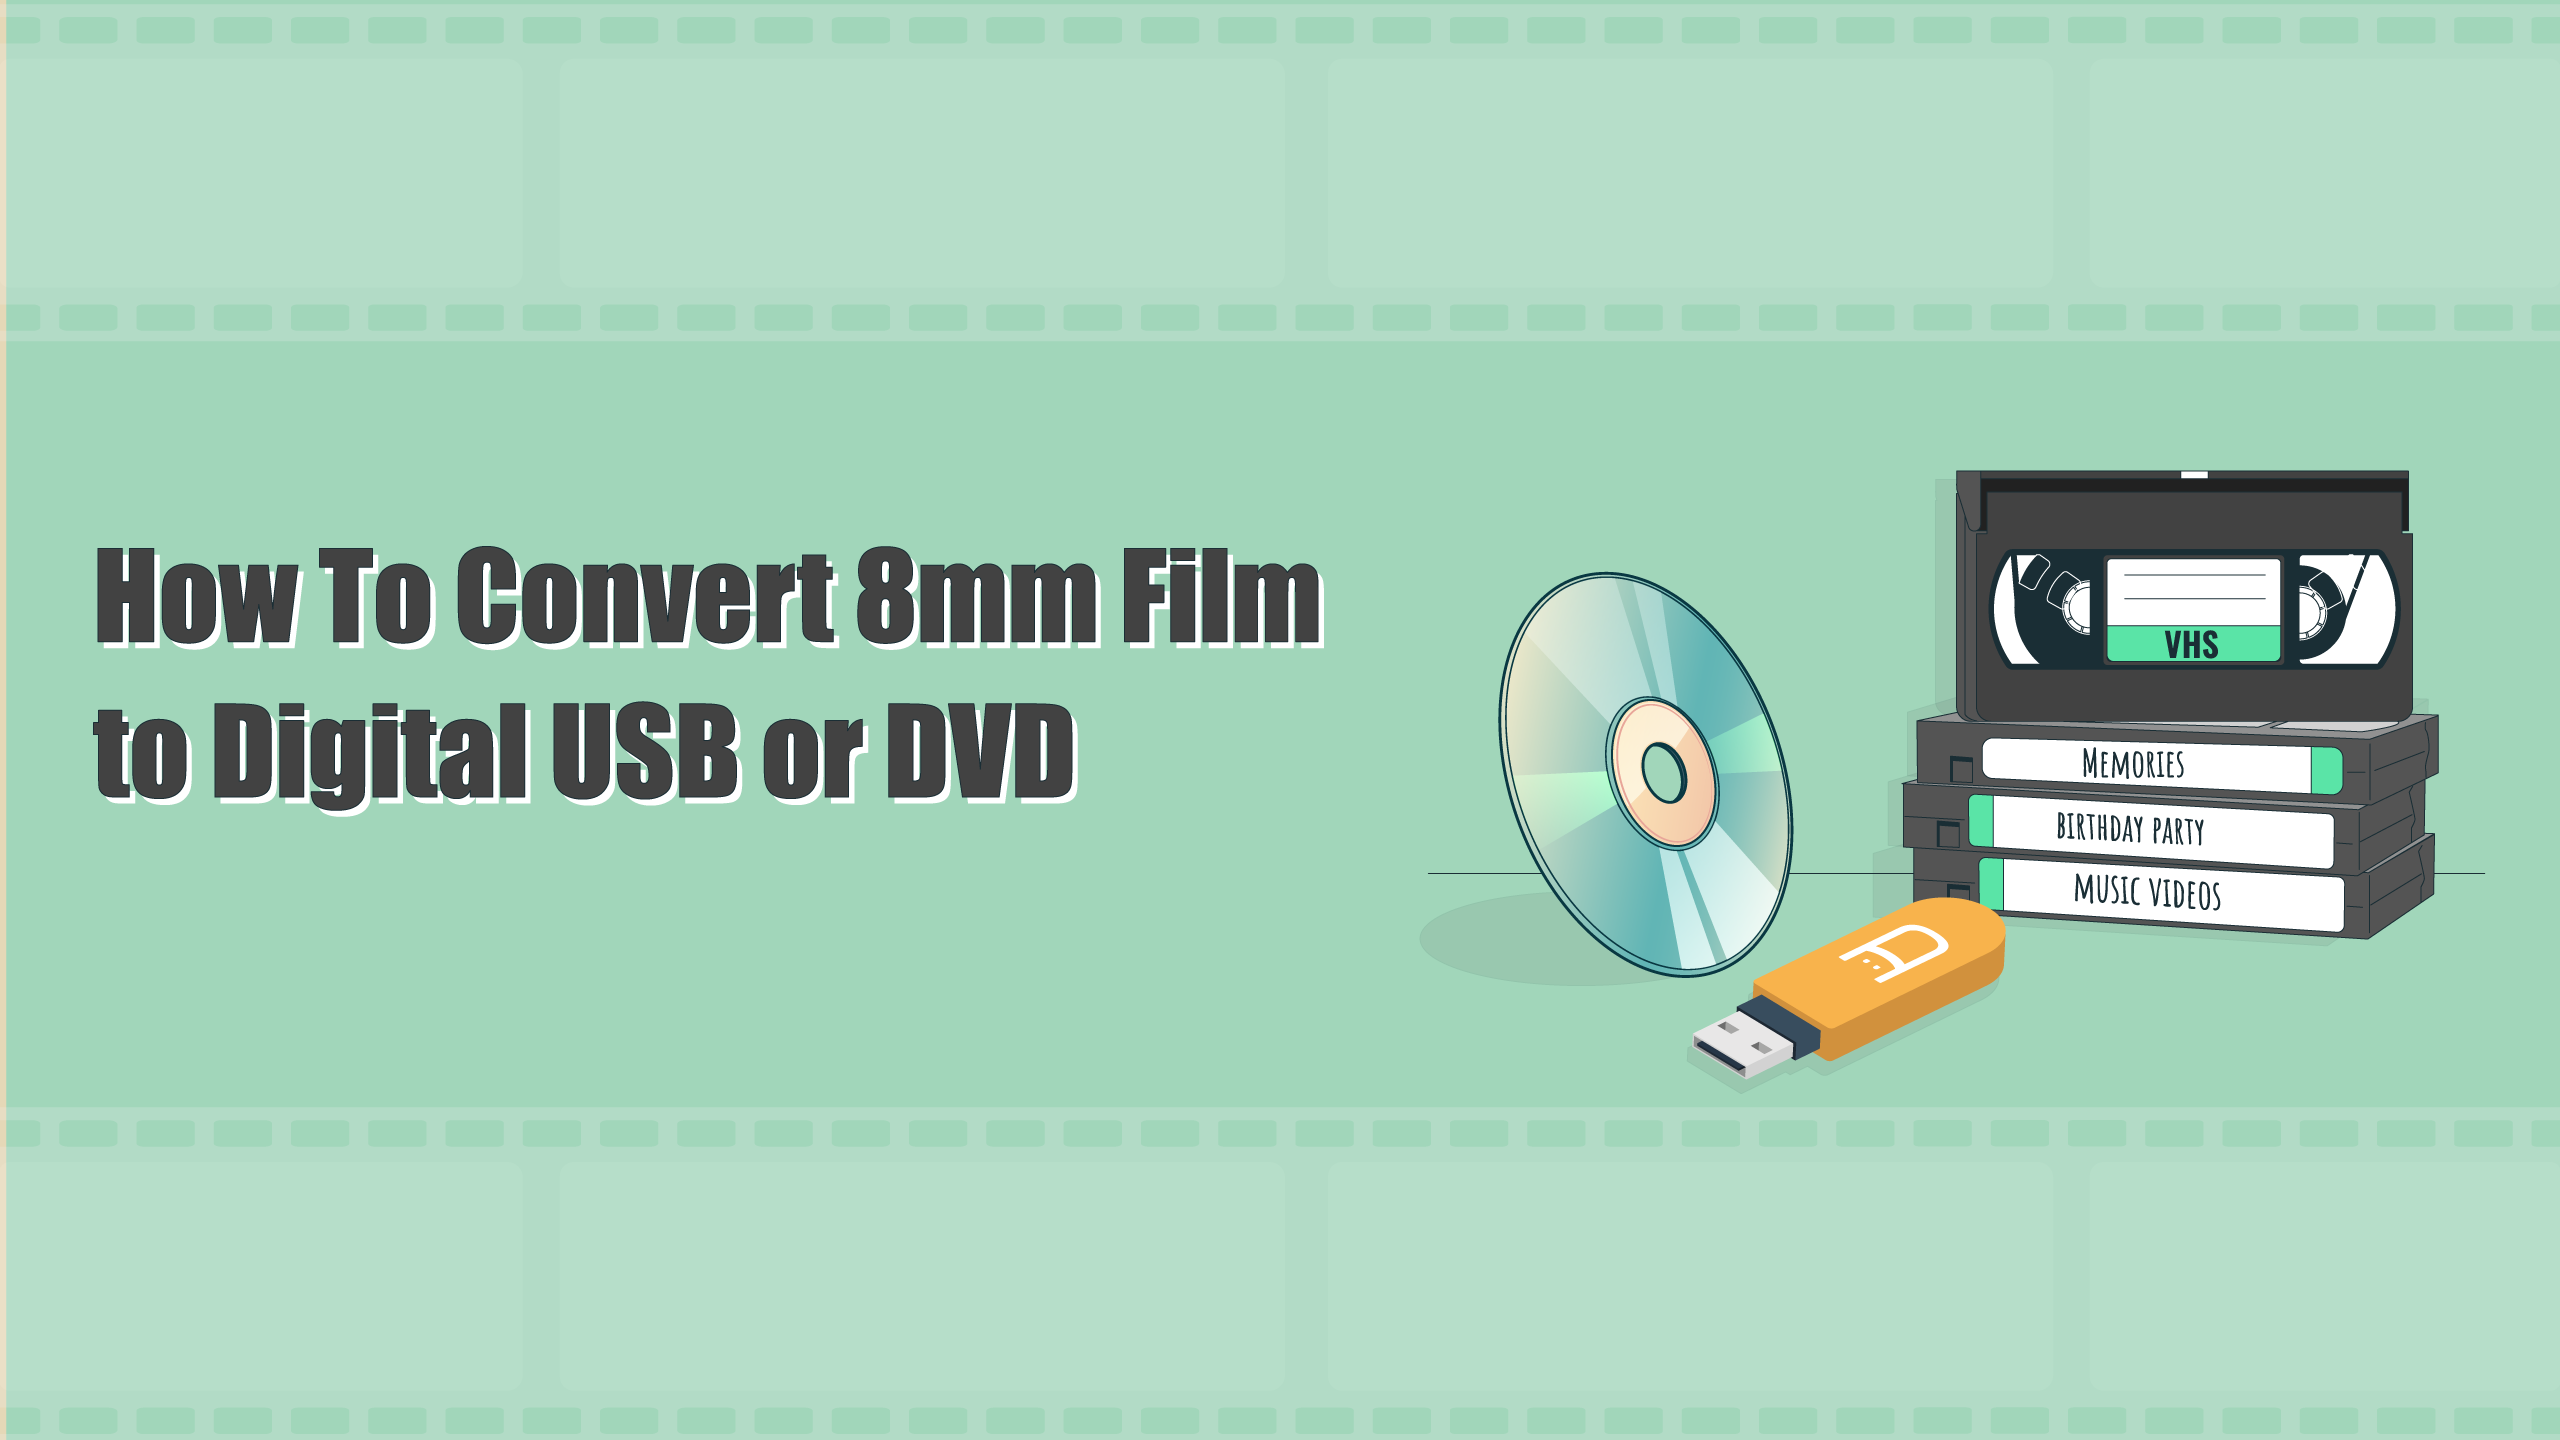 How To Convert 8mm Film to Digital USB or DVD